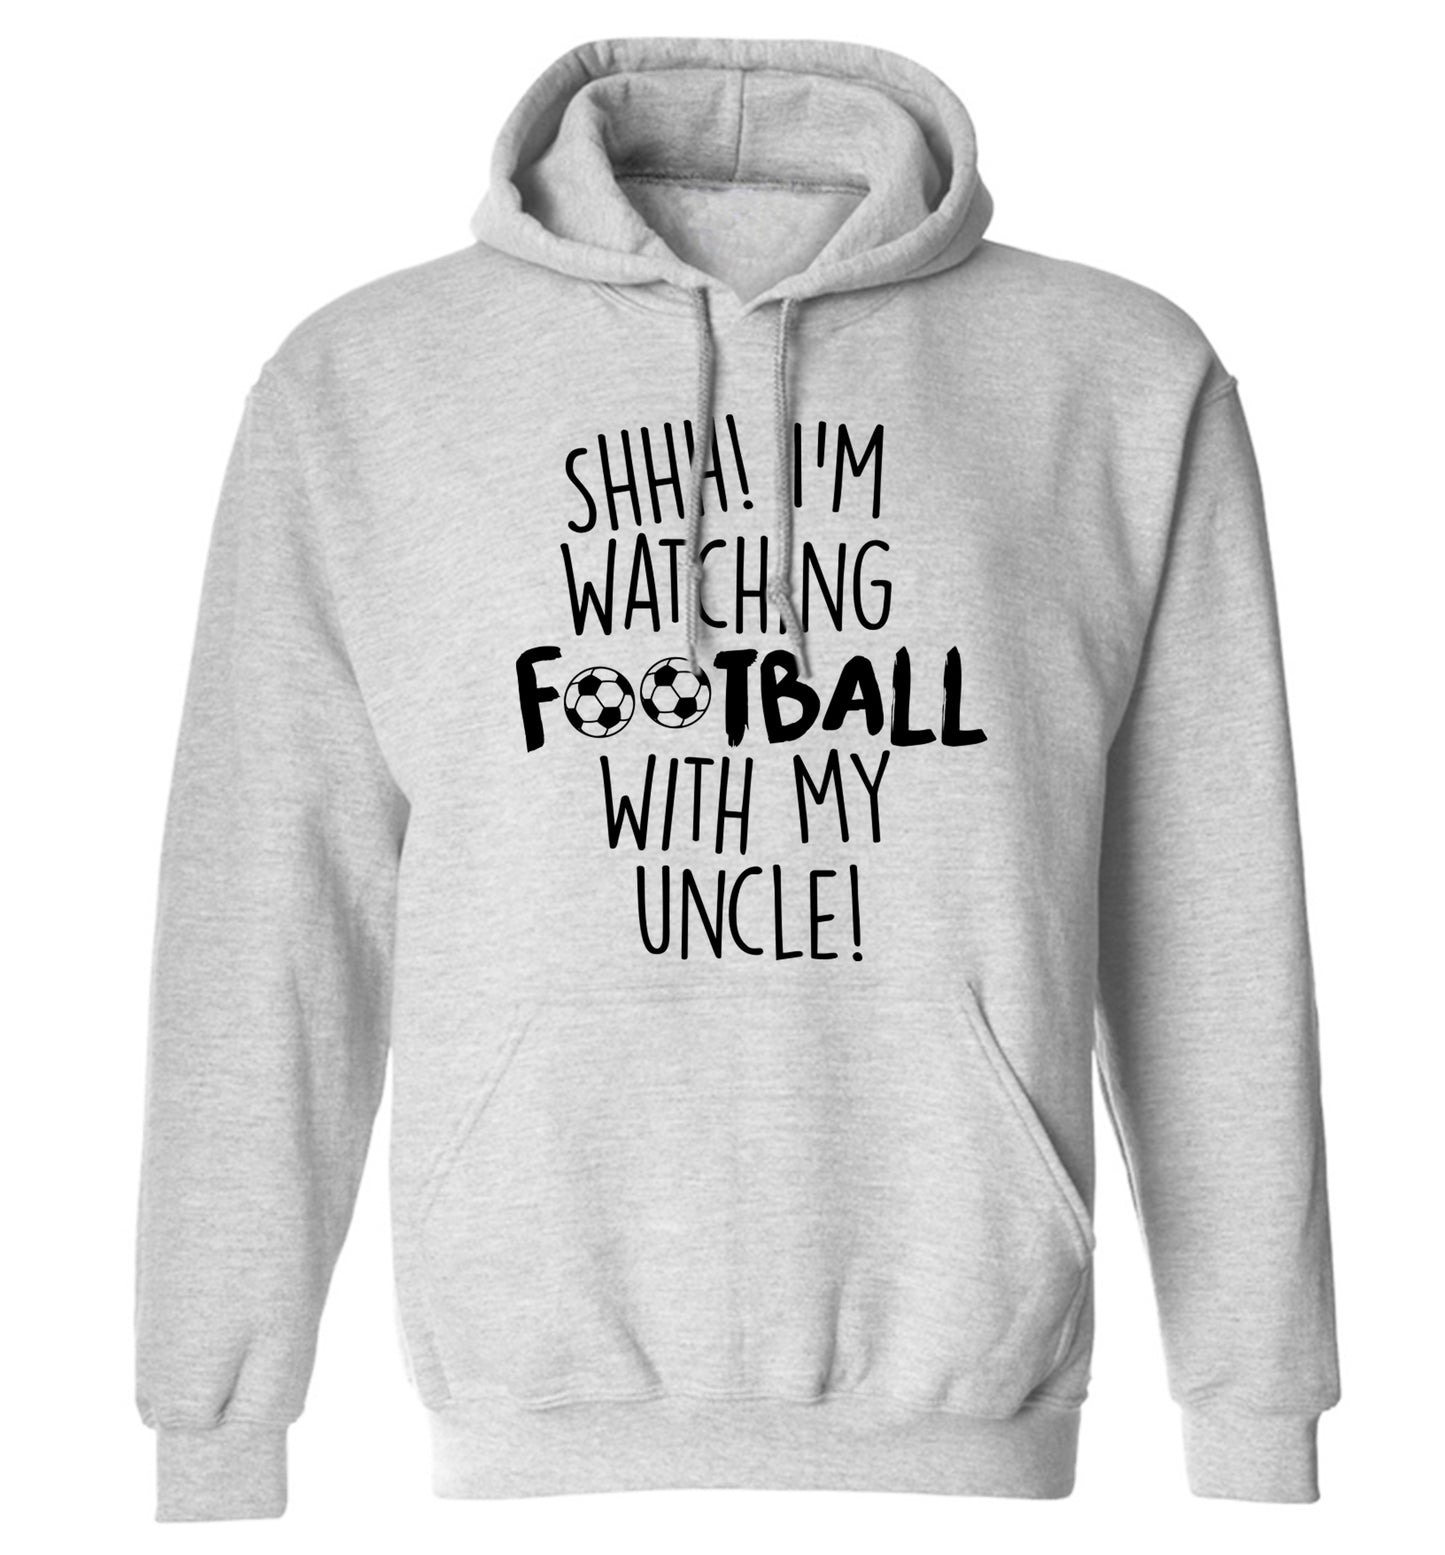 Shhh I'm watching football with my uncle adults unisexgrey hoodie 2XL